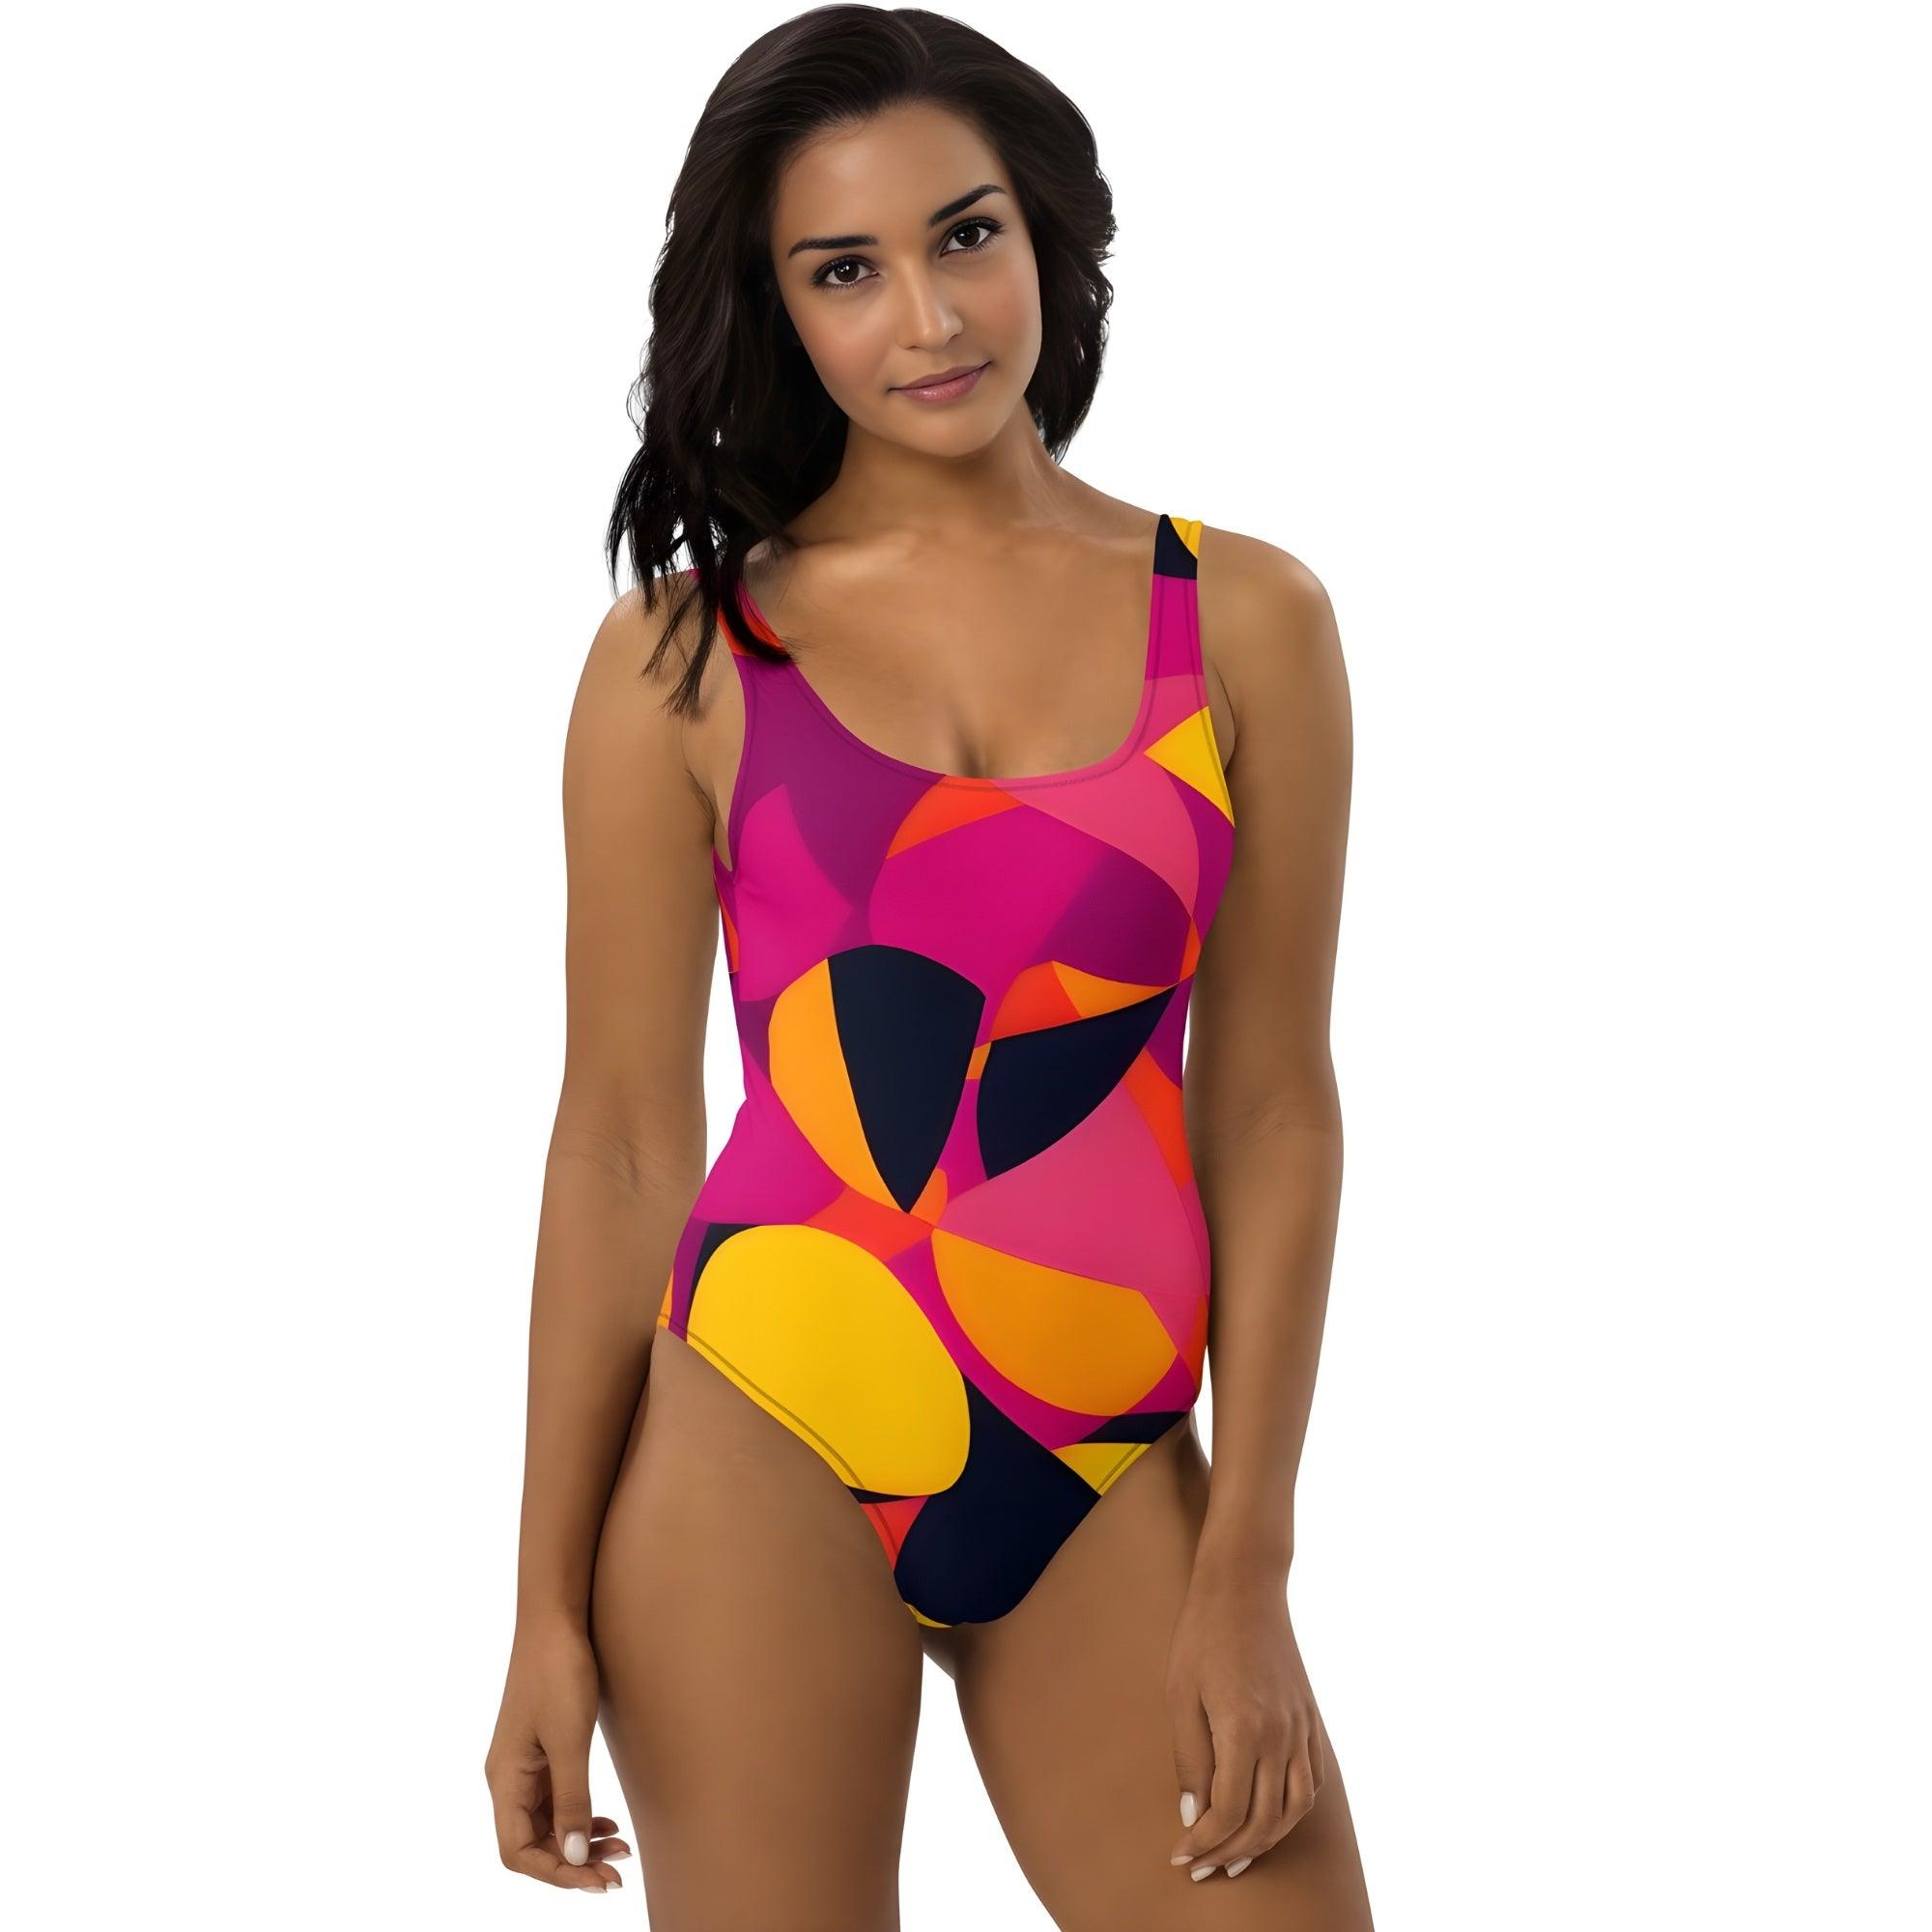 Airline Series 929 Scoop Neck One-Piece Swimsuit - Low Back - Abstract Print Multicolor Geometric Shapes Beach Summer Funky Bold Vibrant Beachwear Pink Orange Yellow Blissfully Brand